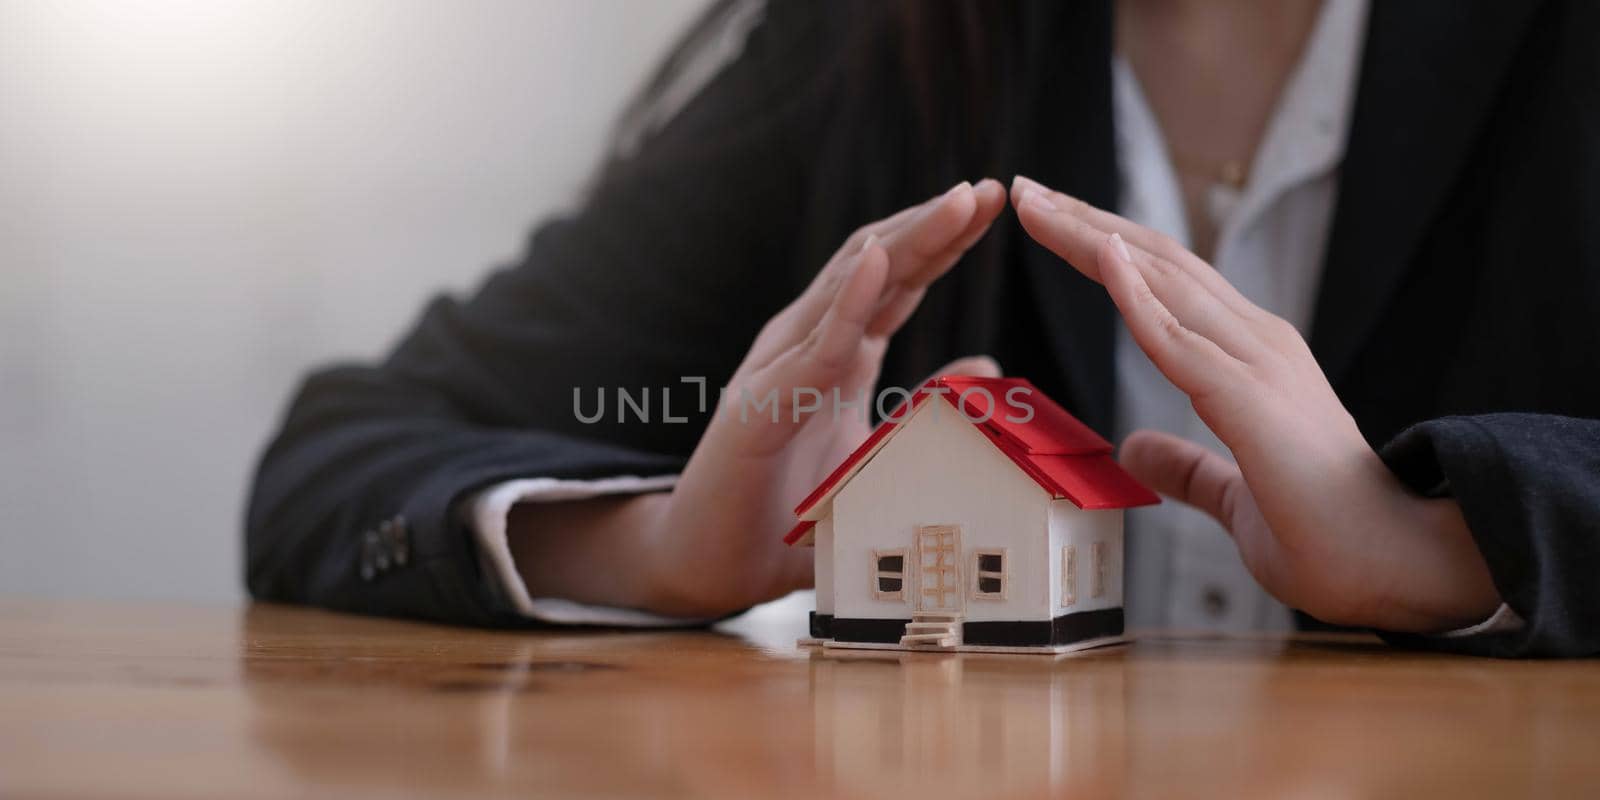 Protect your house concept. Small toy house covered by hands.